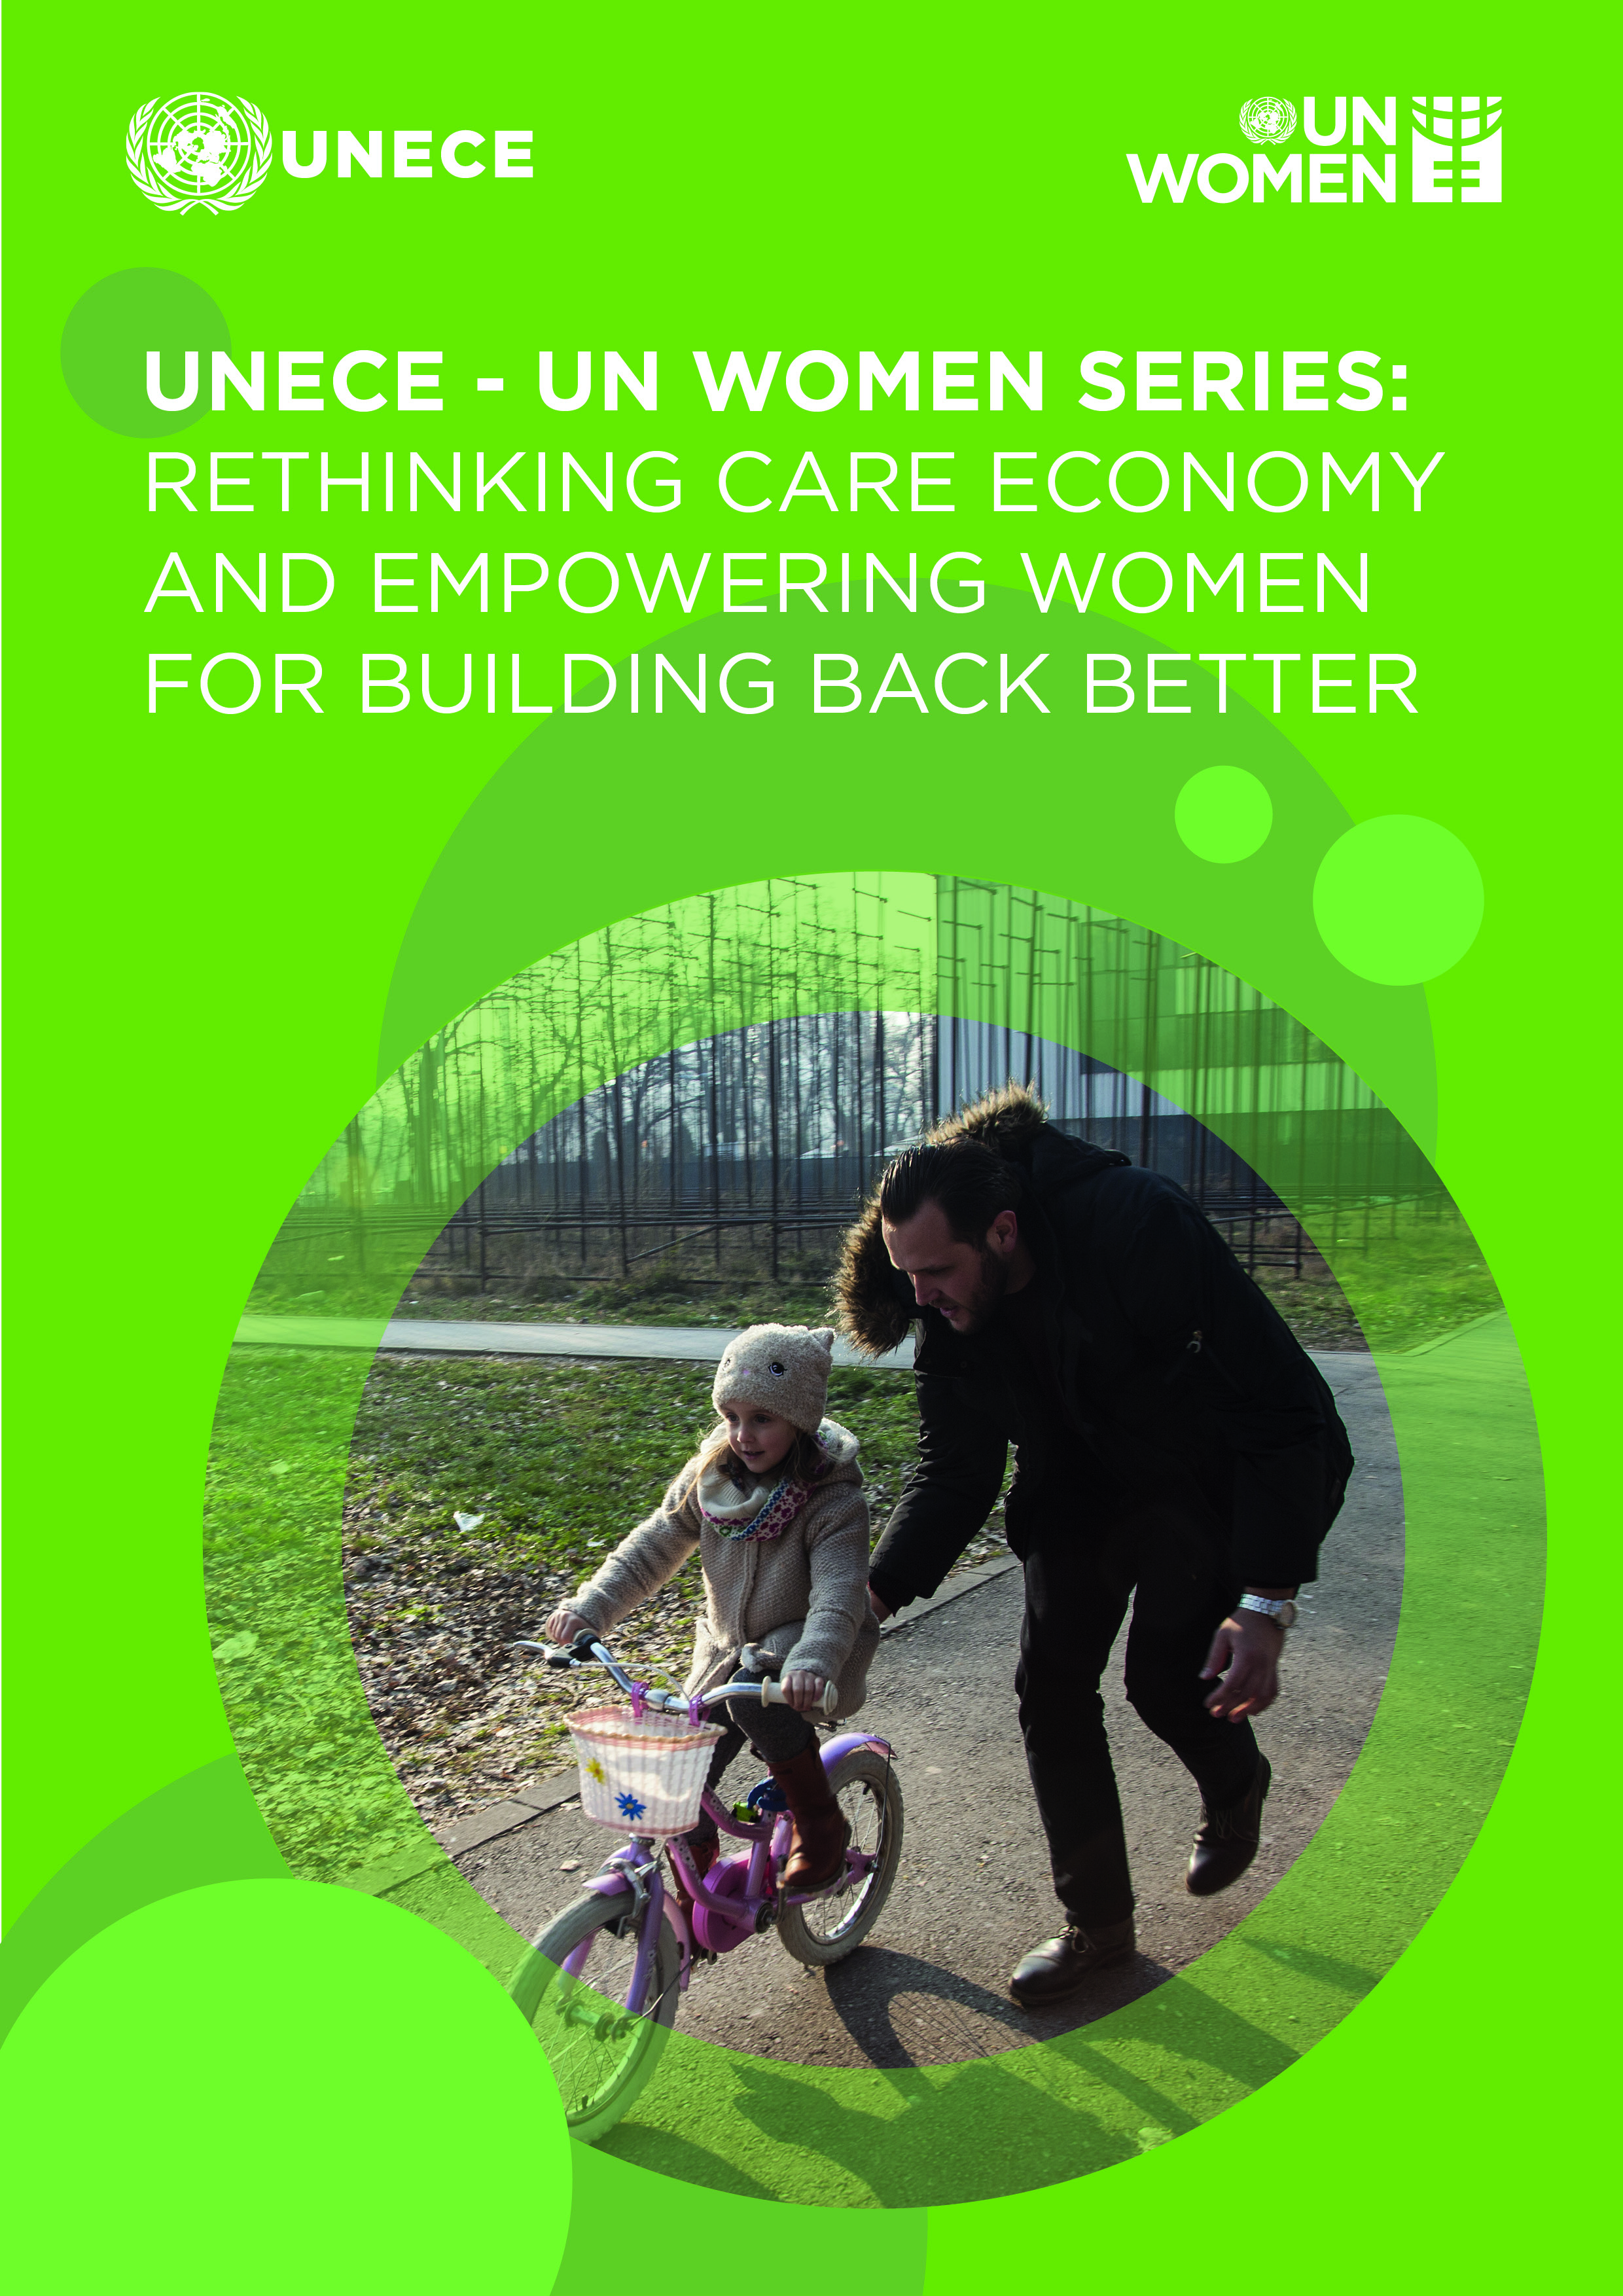 UNECE - UN Women series: Rethinking care economy and empowering